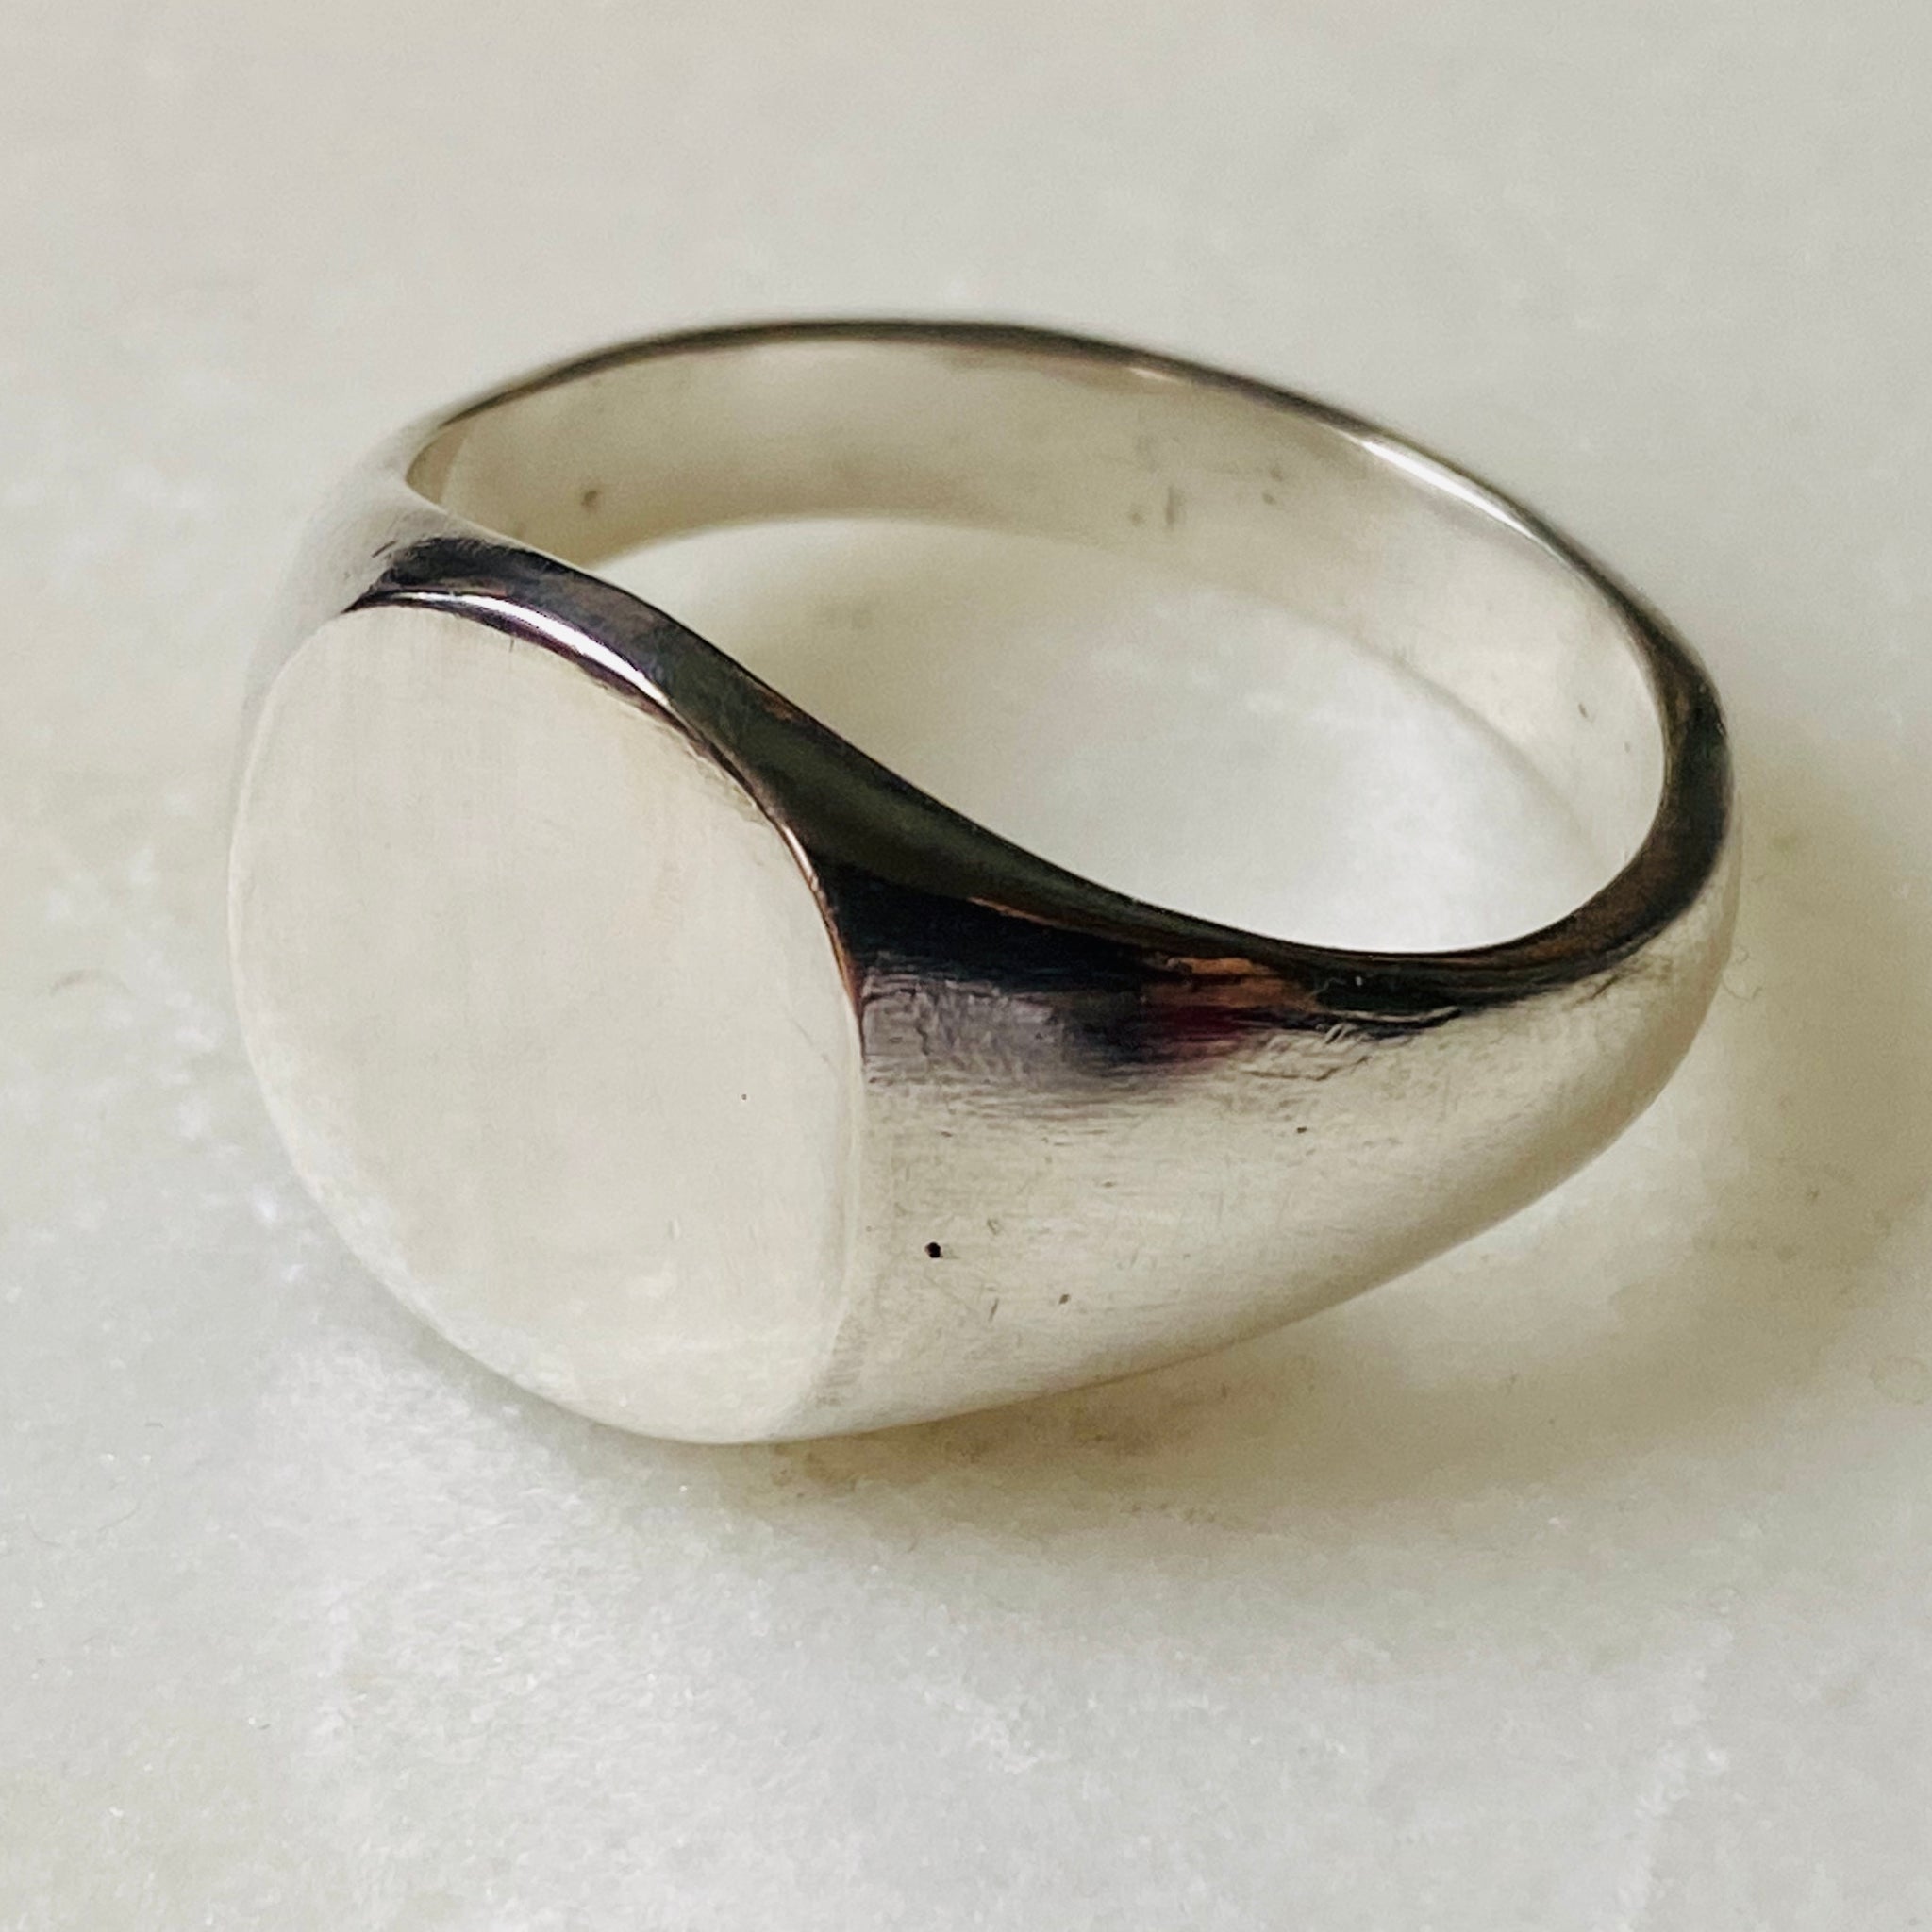 Pinard Oval Heavy Signet Ring, Blank, in Sterling Silver or Brass – Thea  Grant